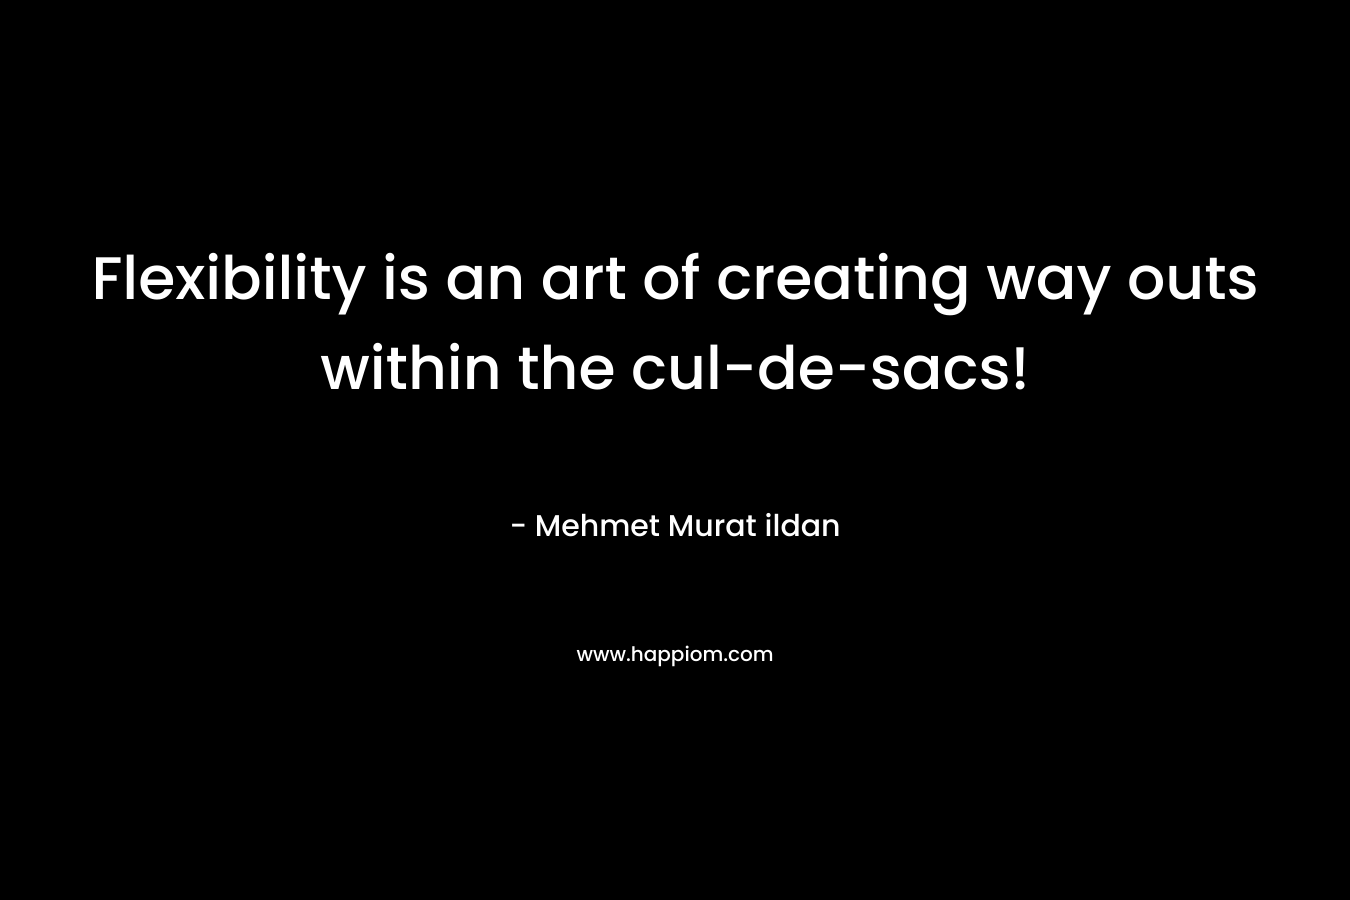 Flexibility is an art of creating way outs within the cul-de-sacs!